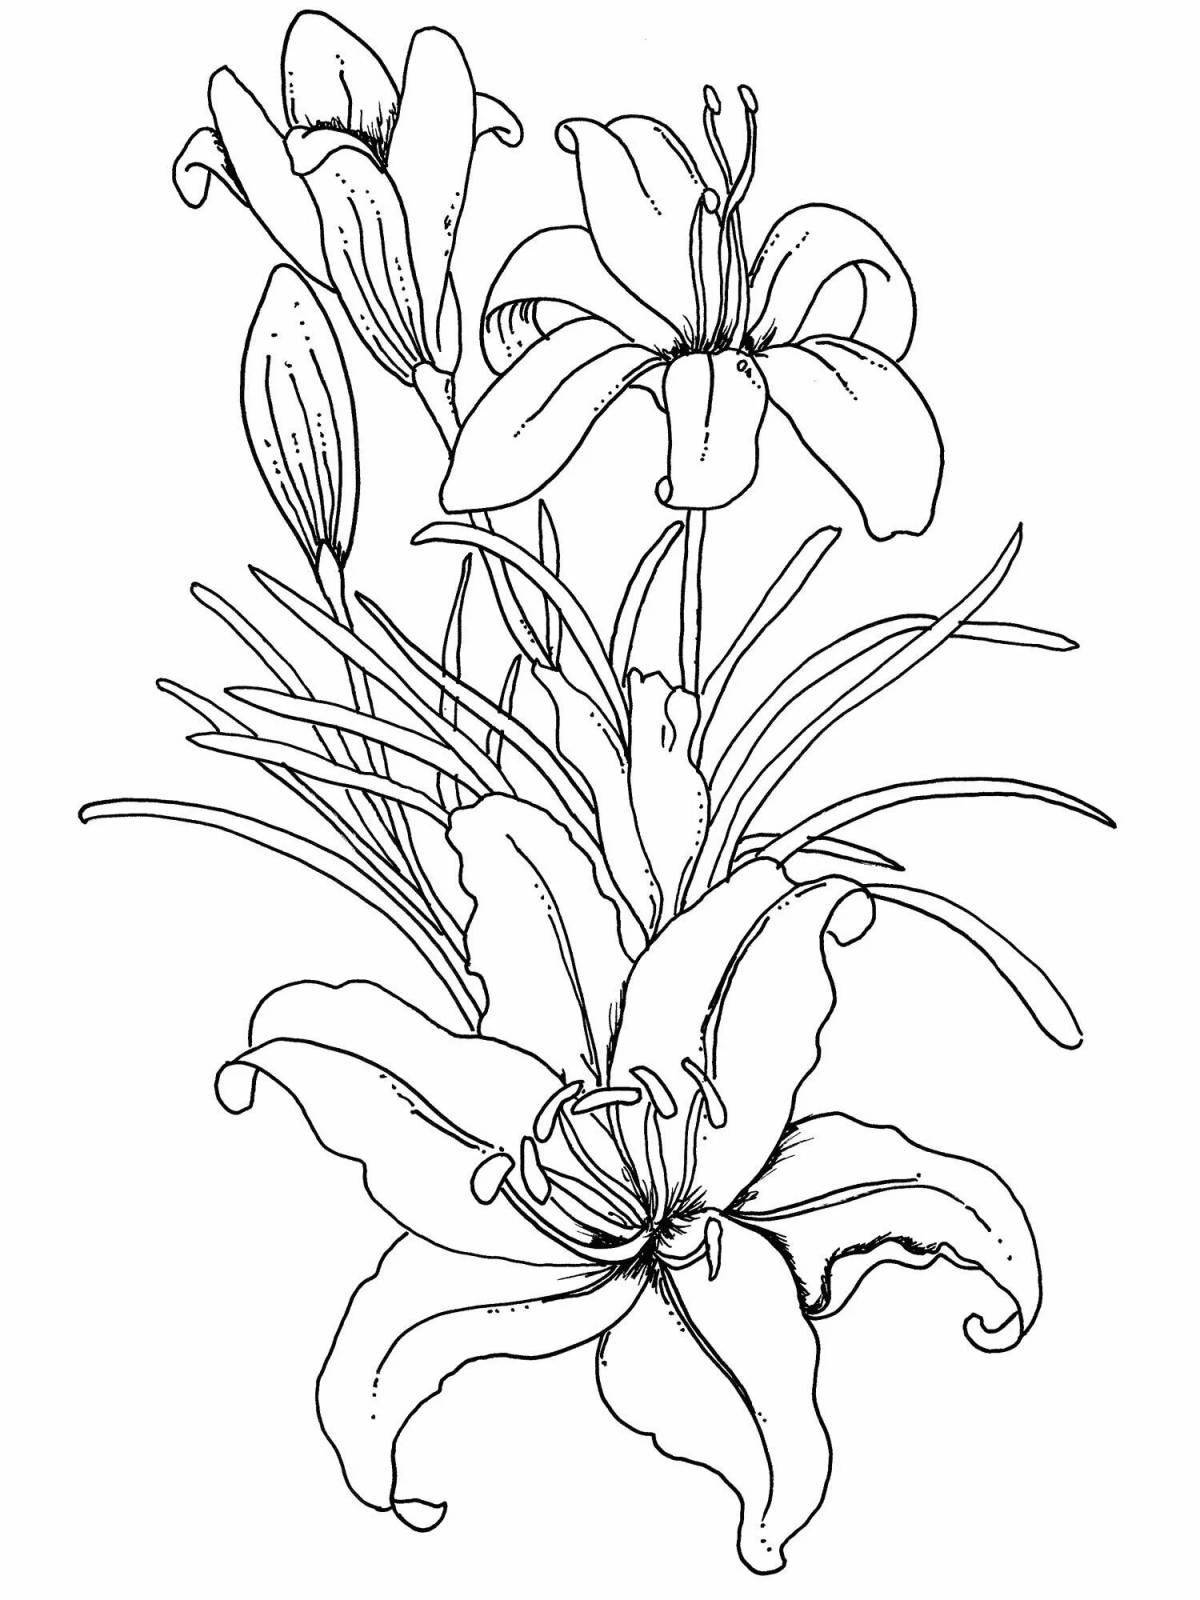 Playtime lily coloring pages for kids